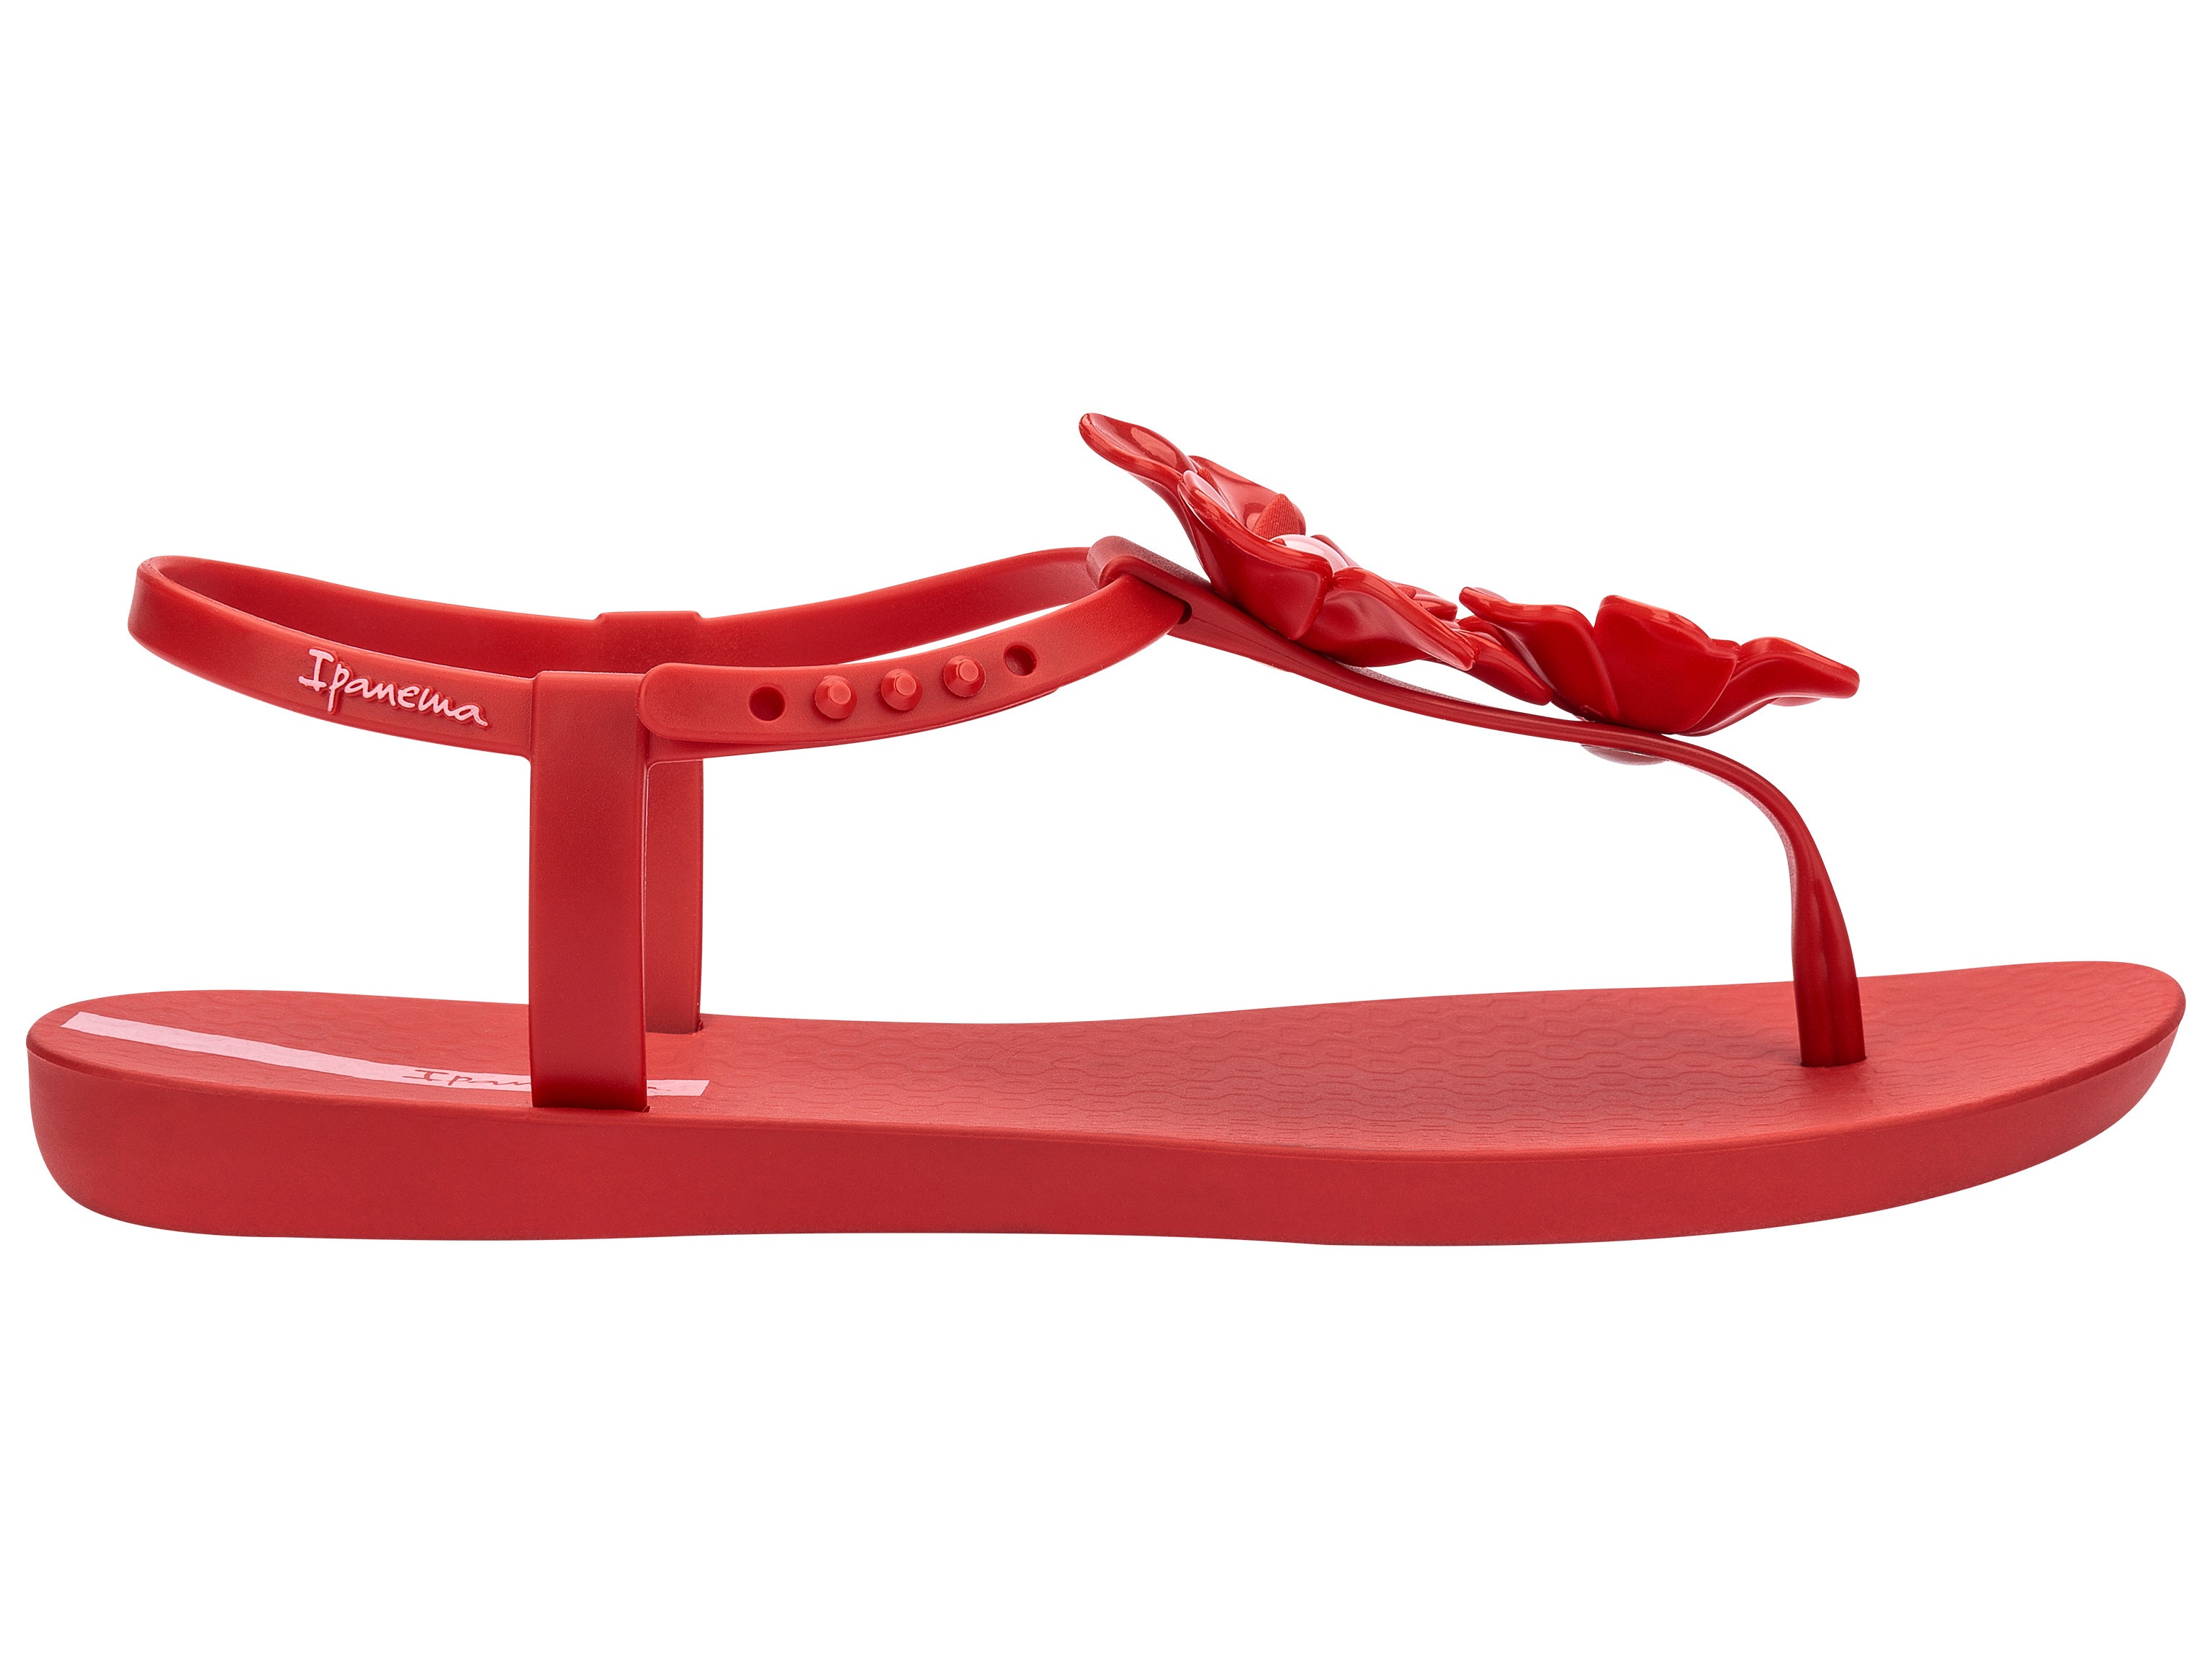 Outer side view of a Red Ipanema Duo Flowers women's t-strap sandal with two flowers.